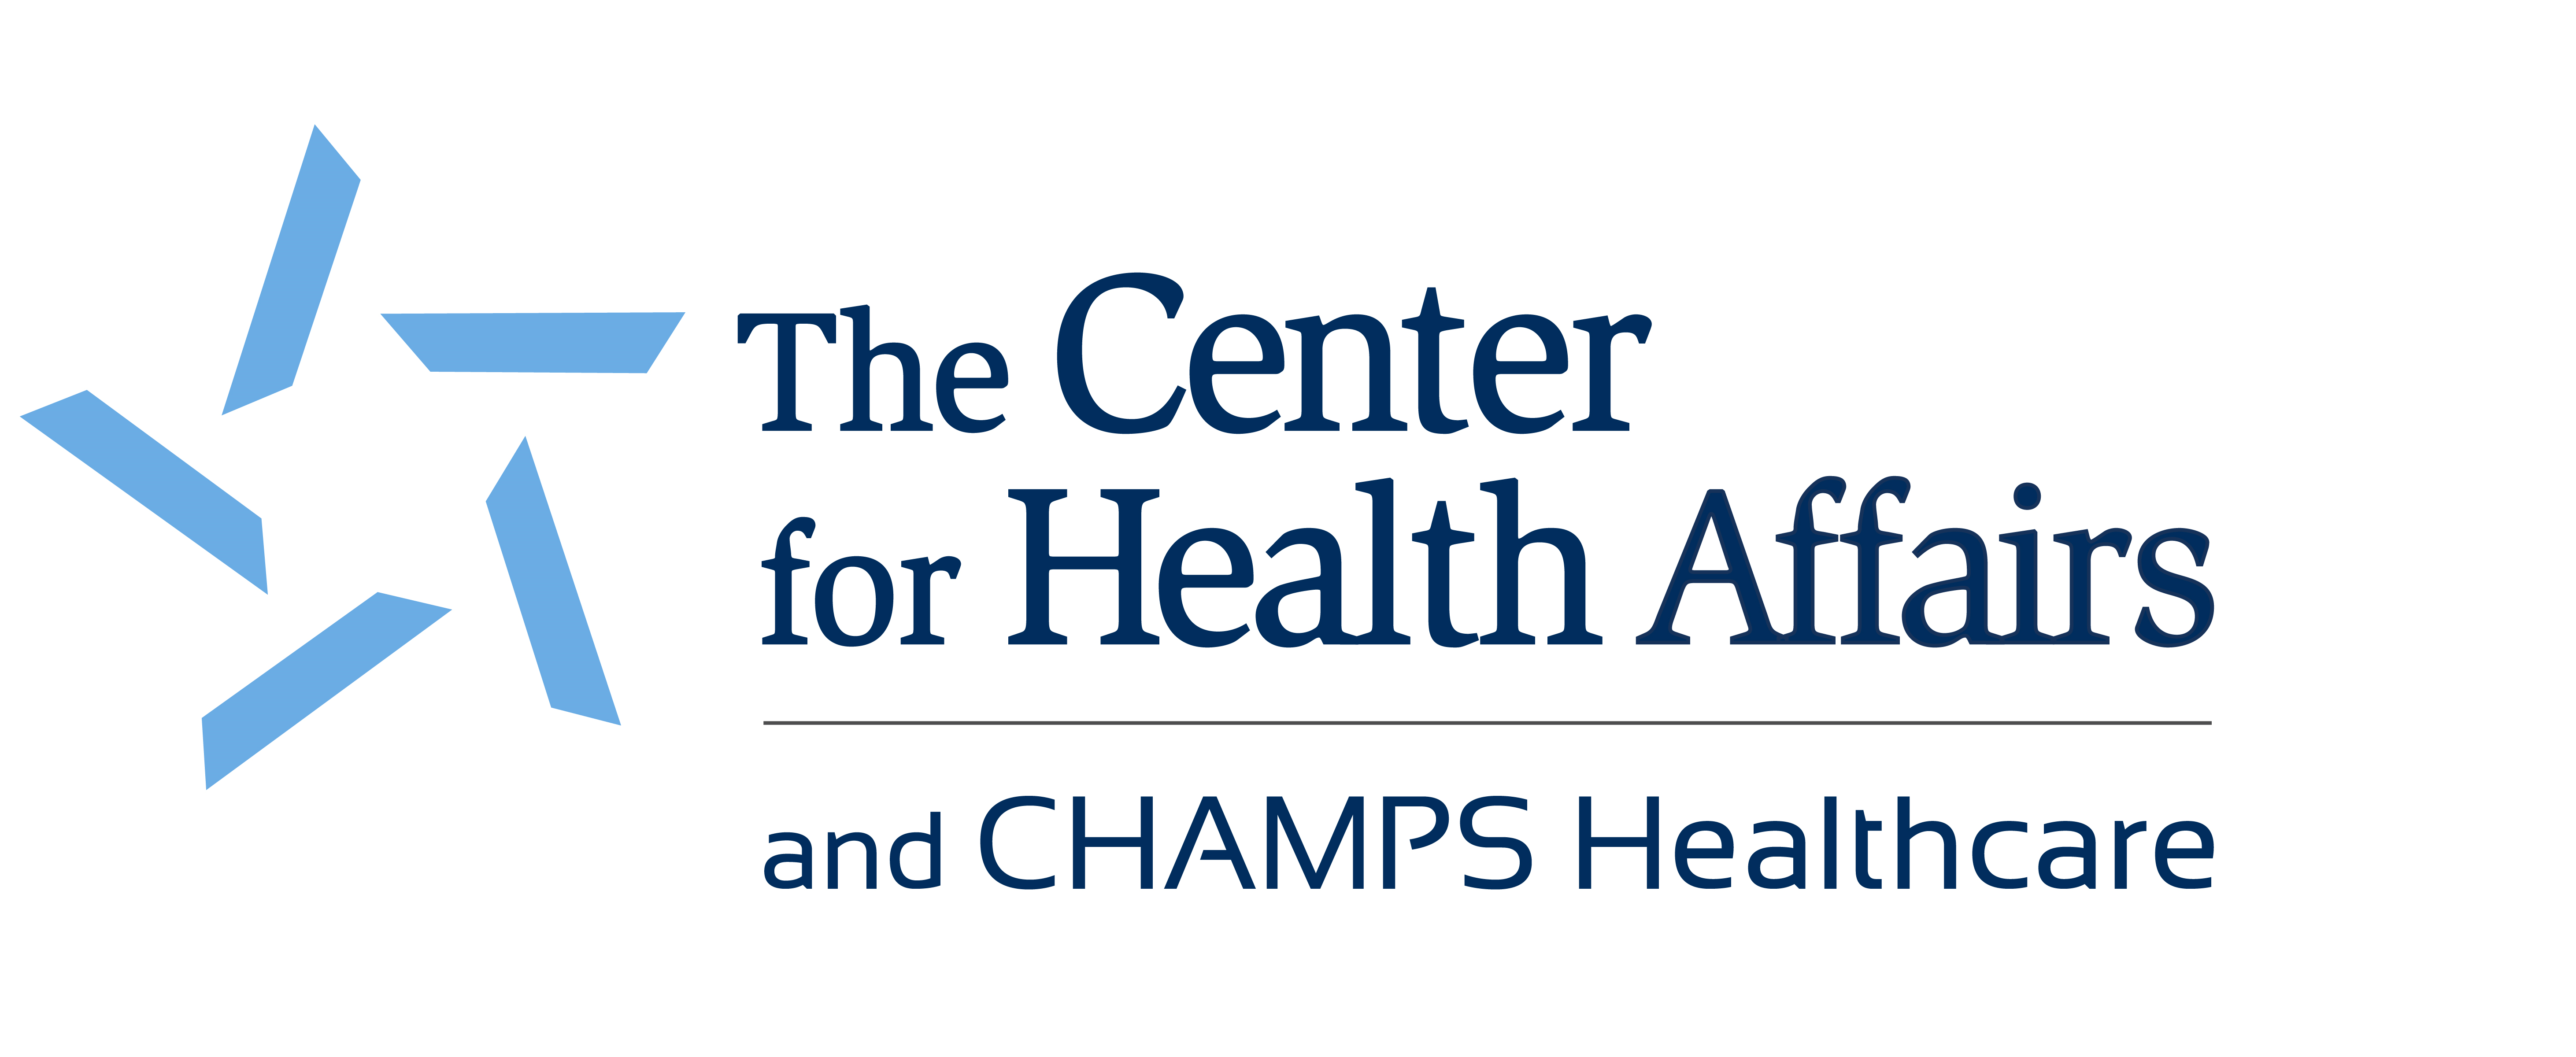 The Center for Health Affairs & CHAMPS Healthcare Company Logo